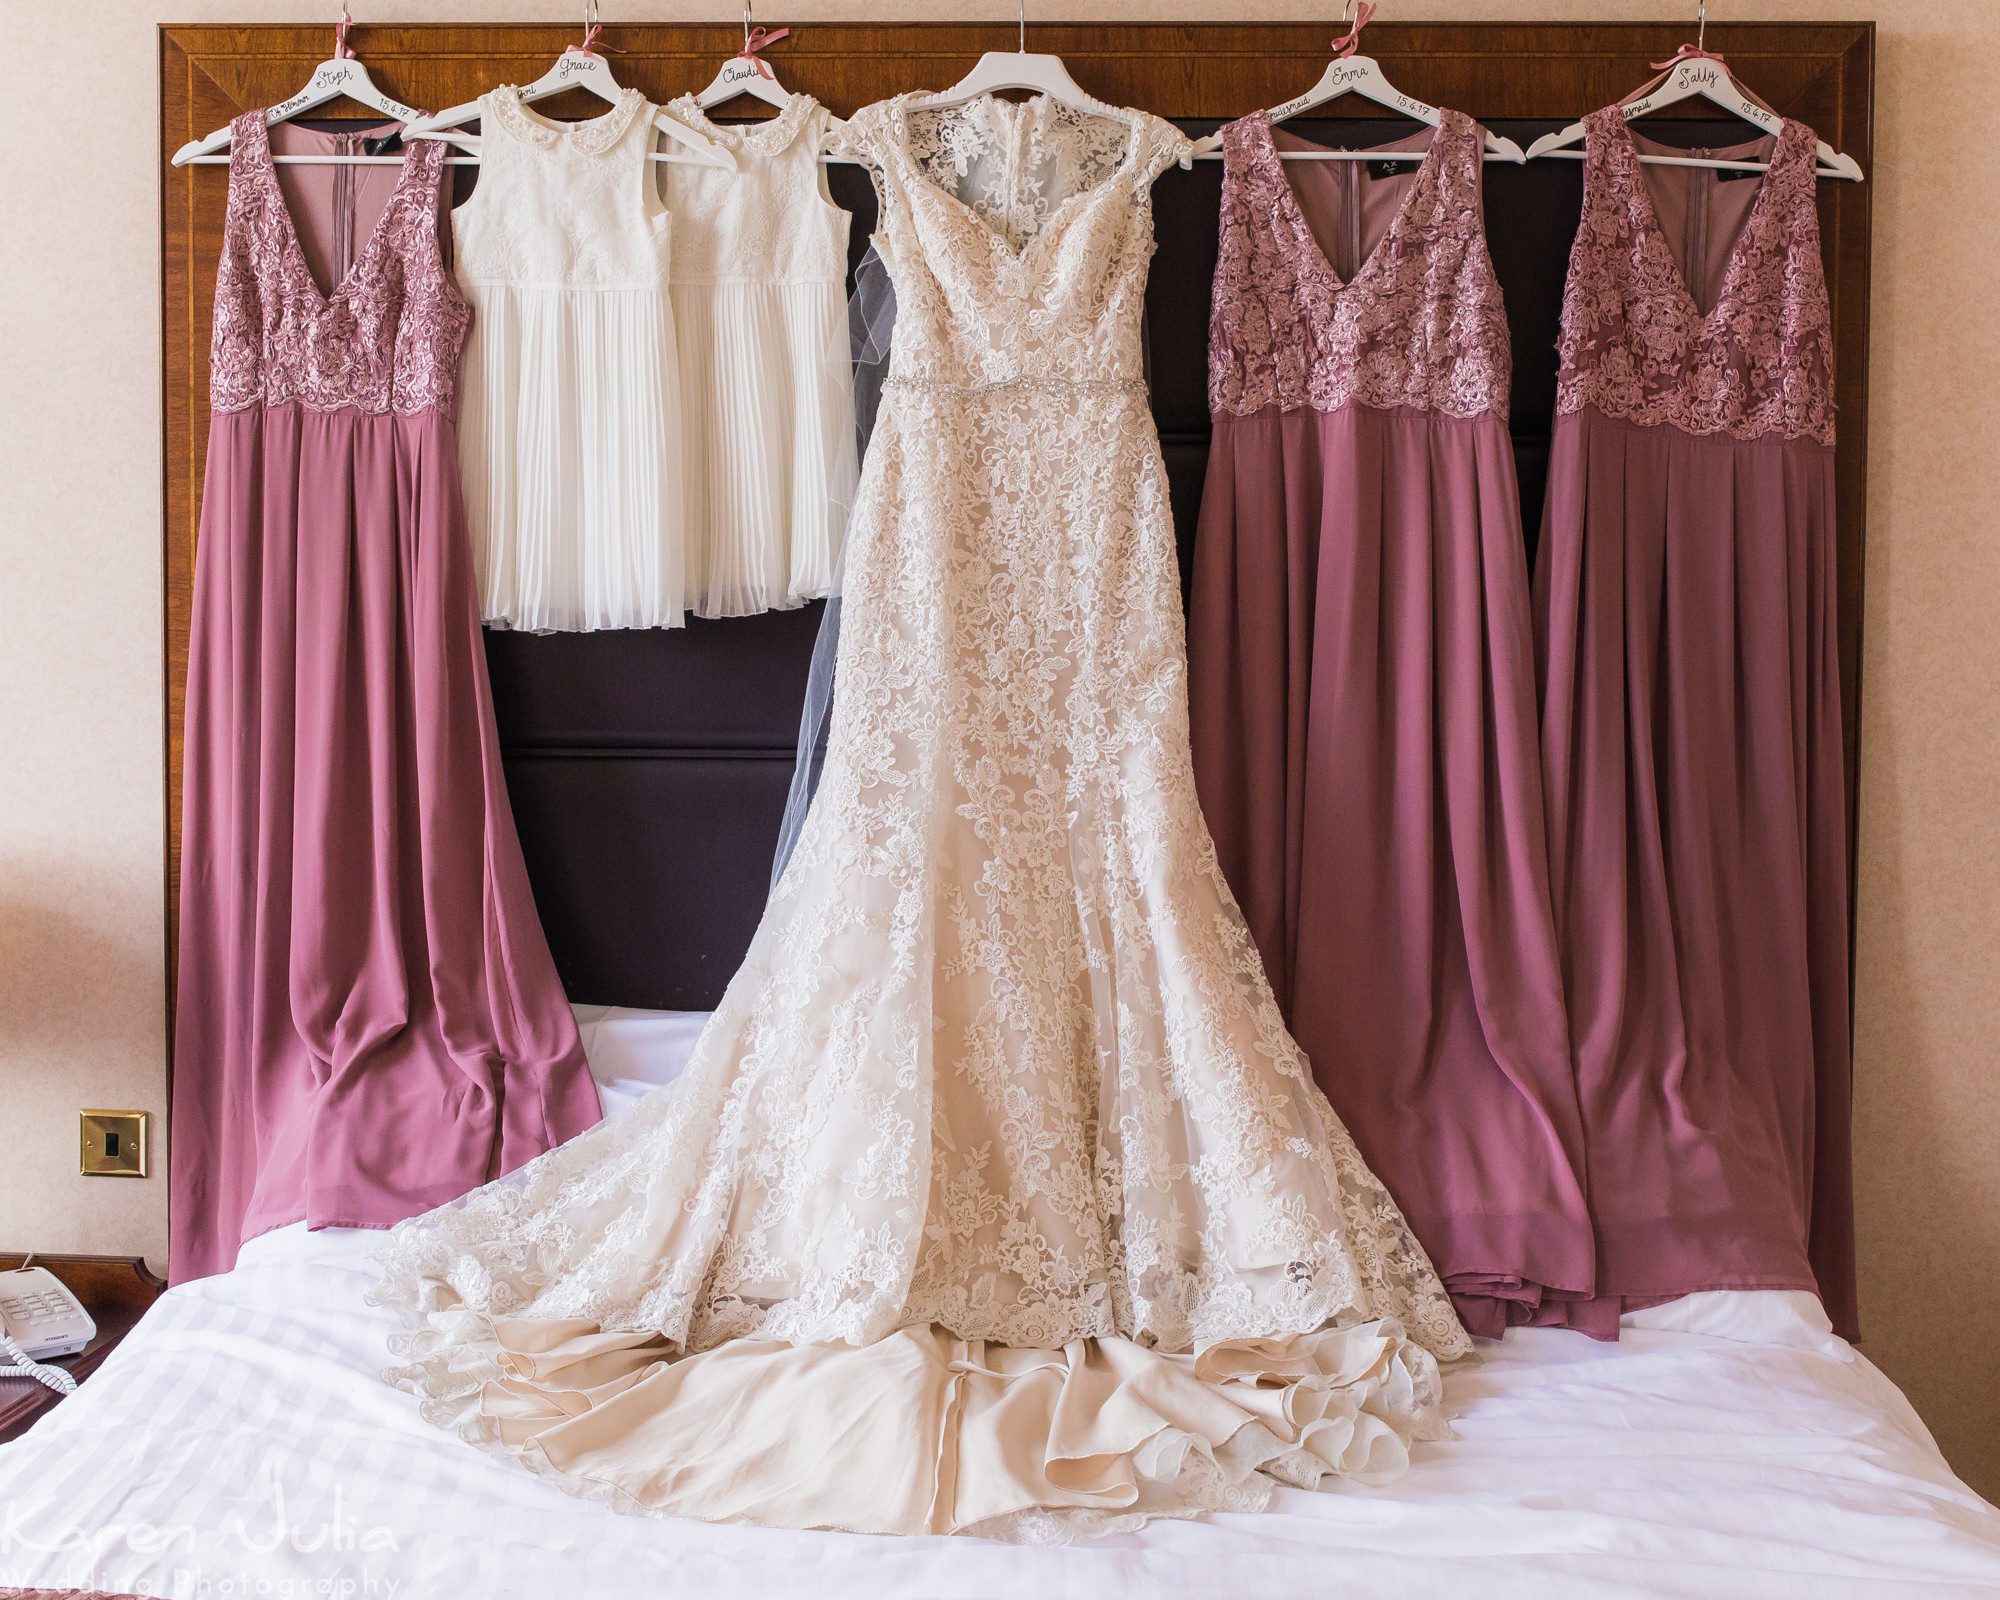 wedding and bridesmaids dresses hanging above bed in Shrigley Hall